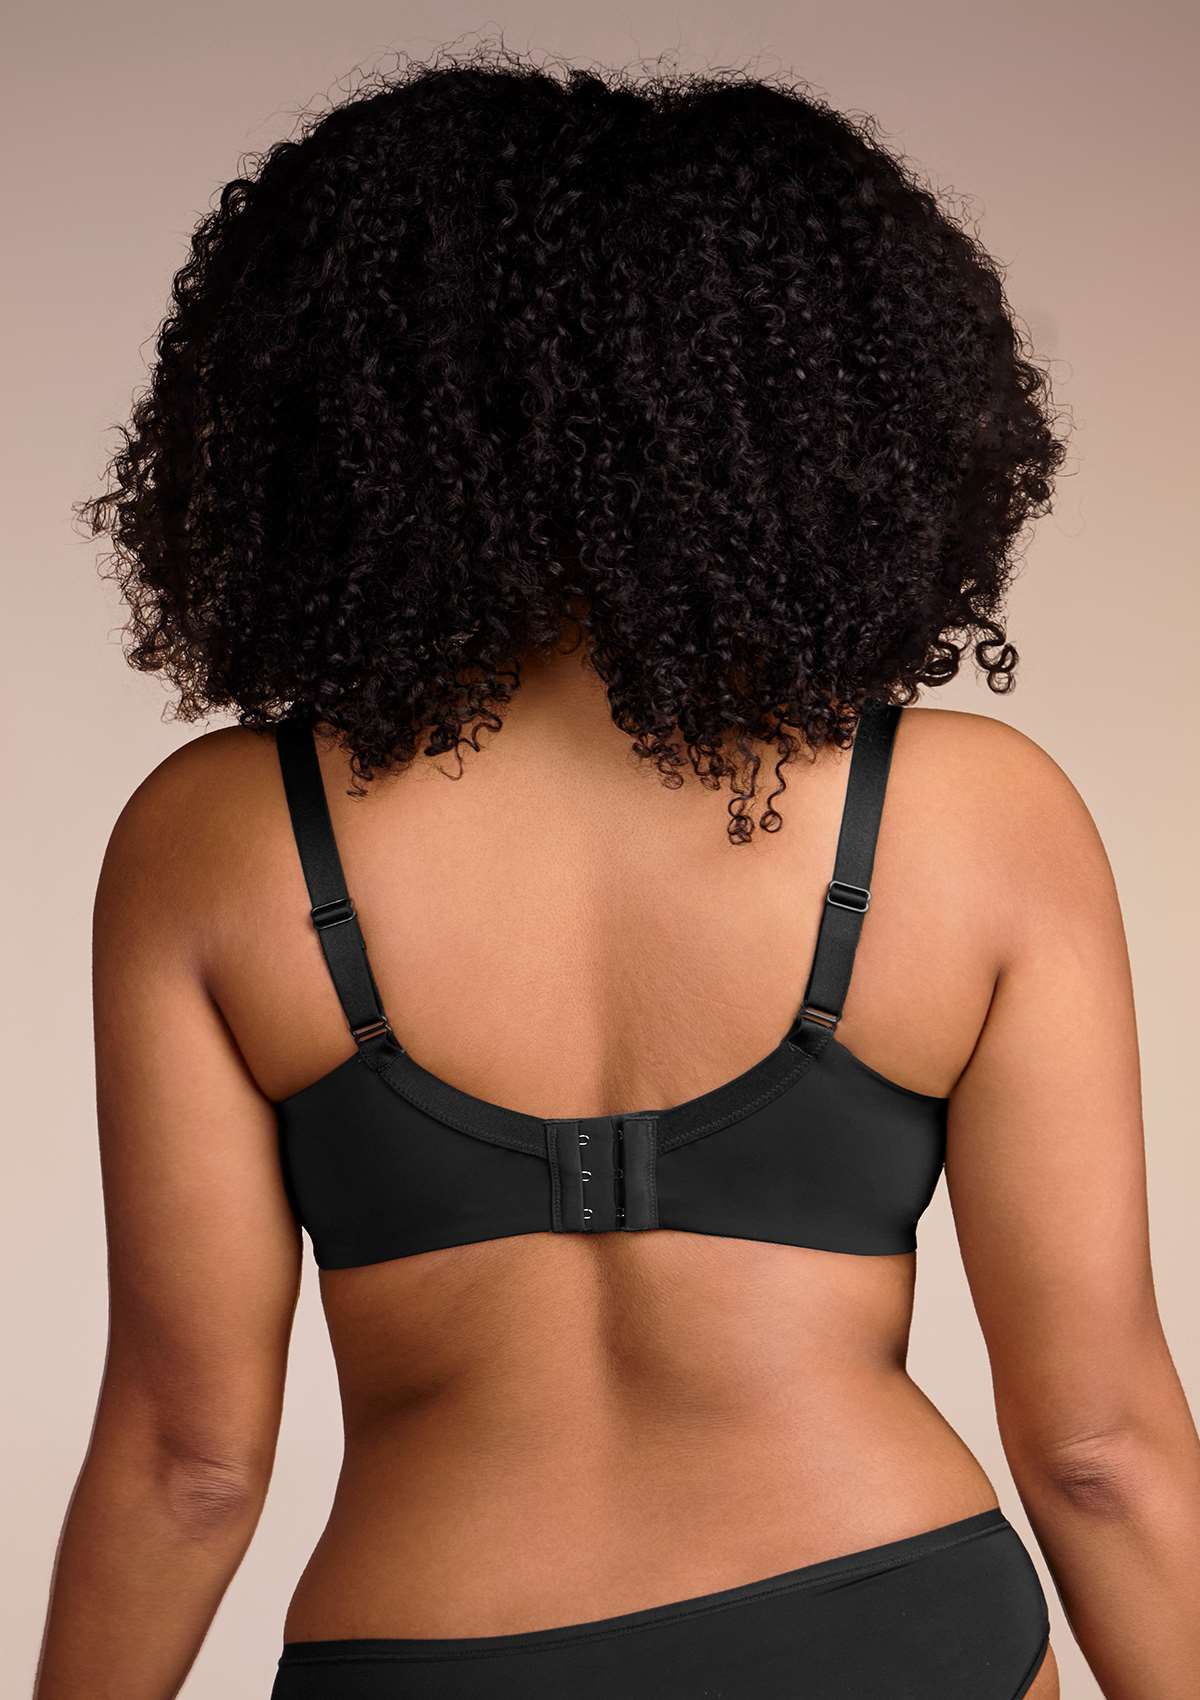 HSIA Gemma Smooth Padded T-shirt Everyday Bras - For Lift And Comfort - Black / 42 / D